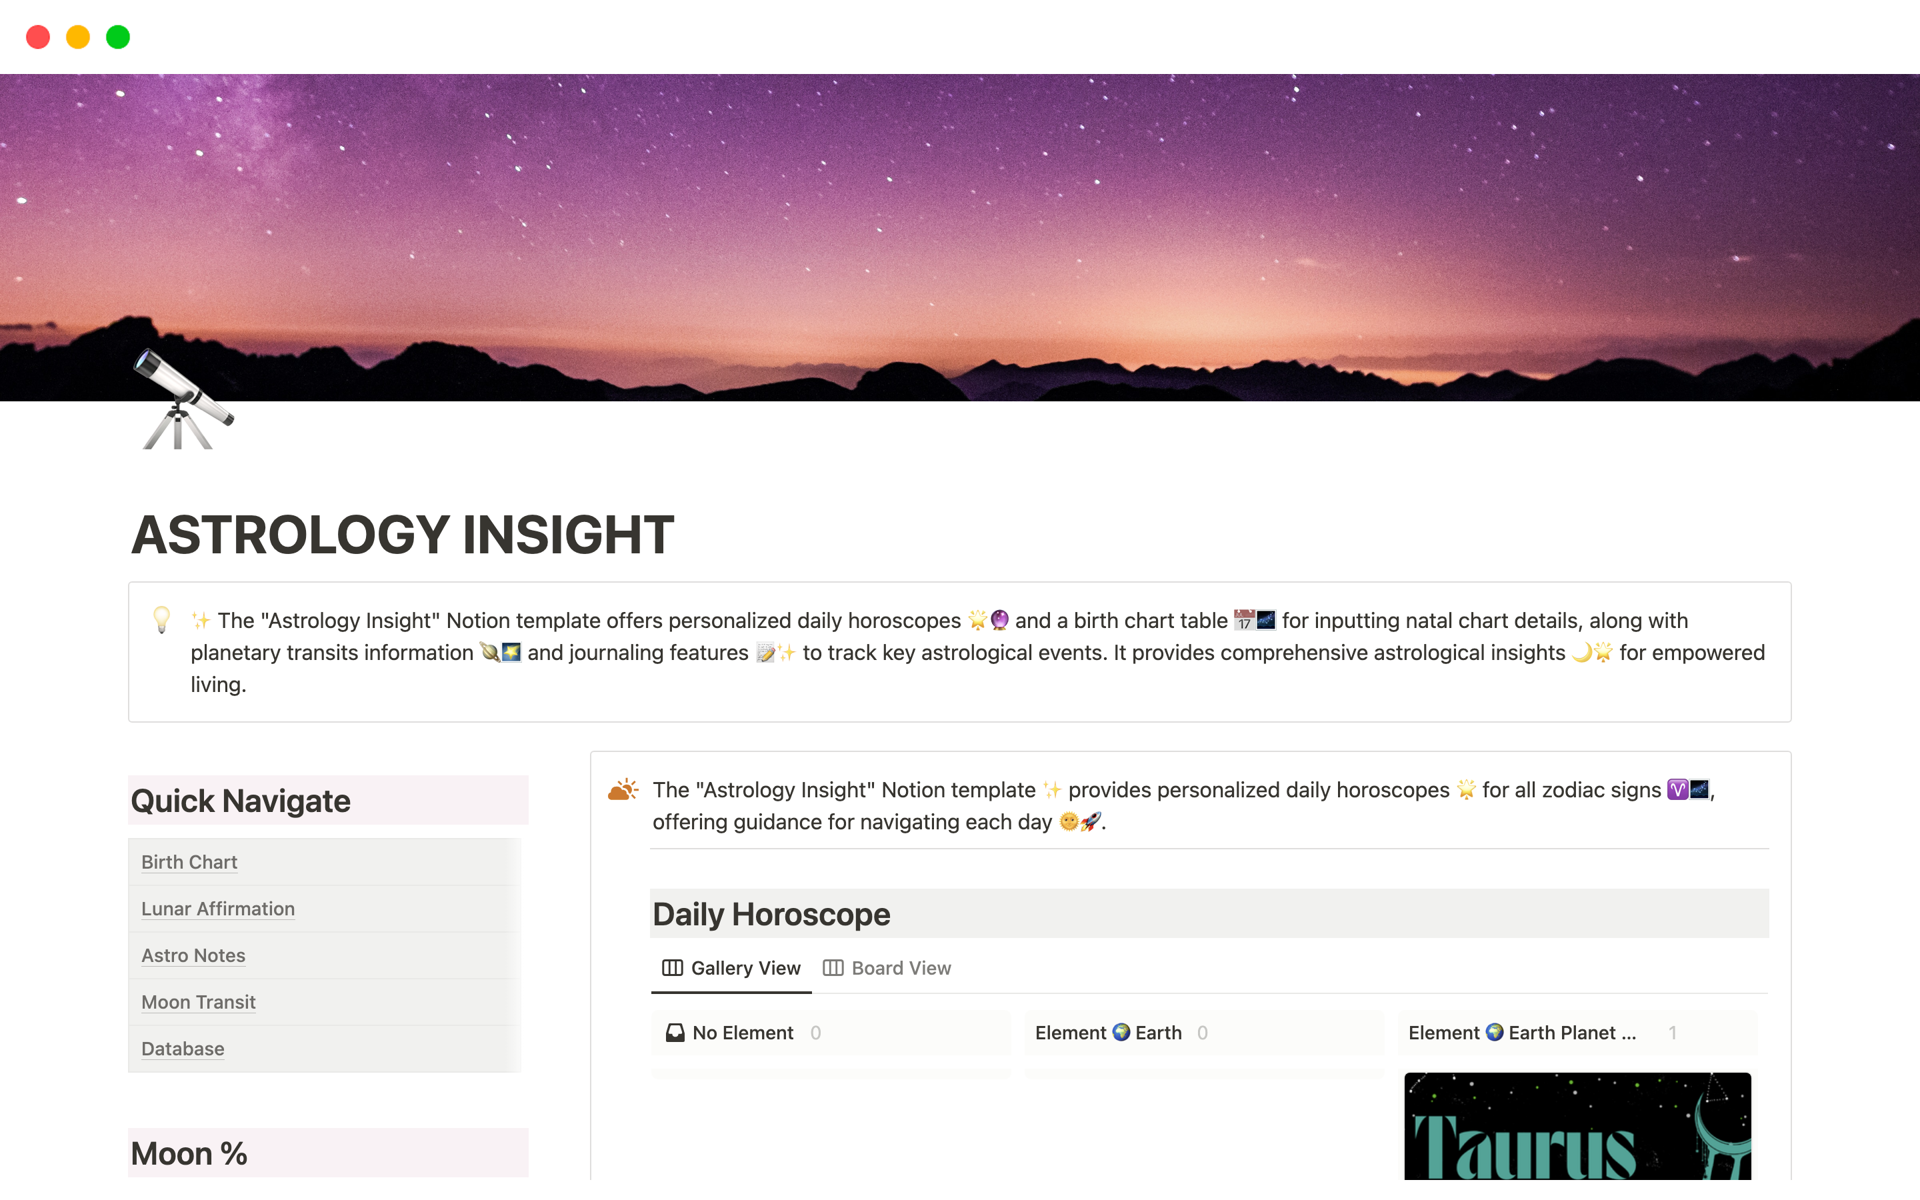 💡 ✨ The "Astrology Insight" Notion template offers personalized profound initiation into spirituality and awakening.